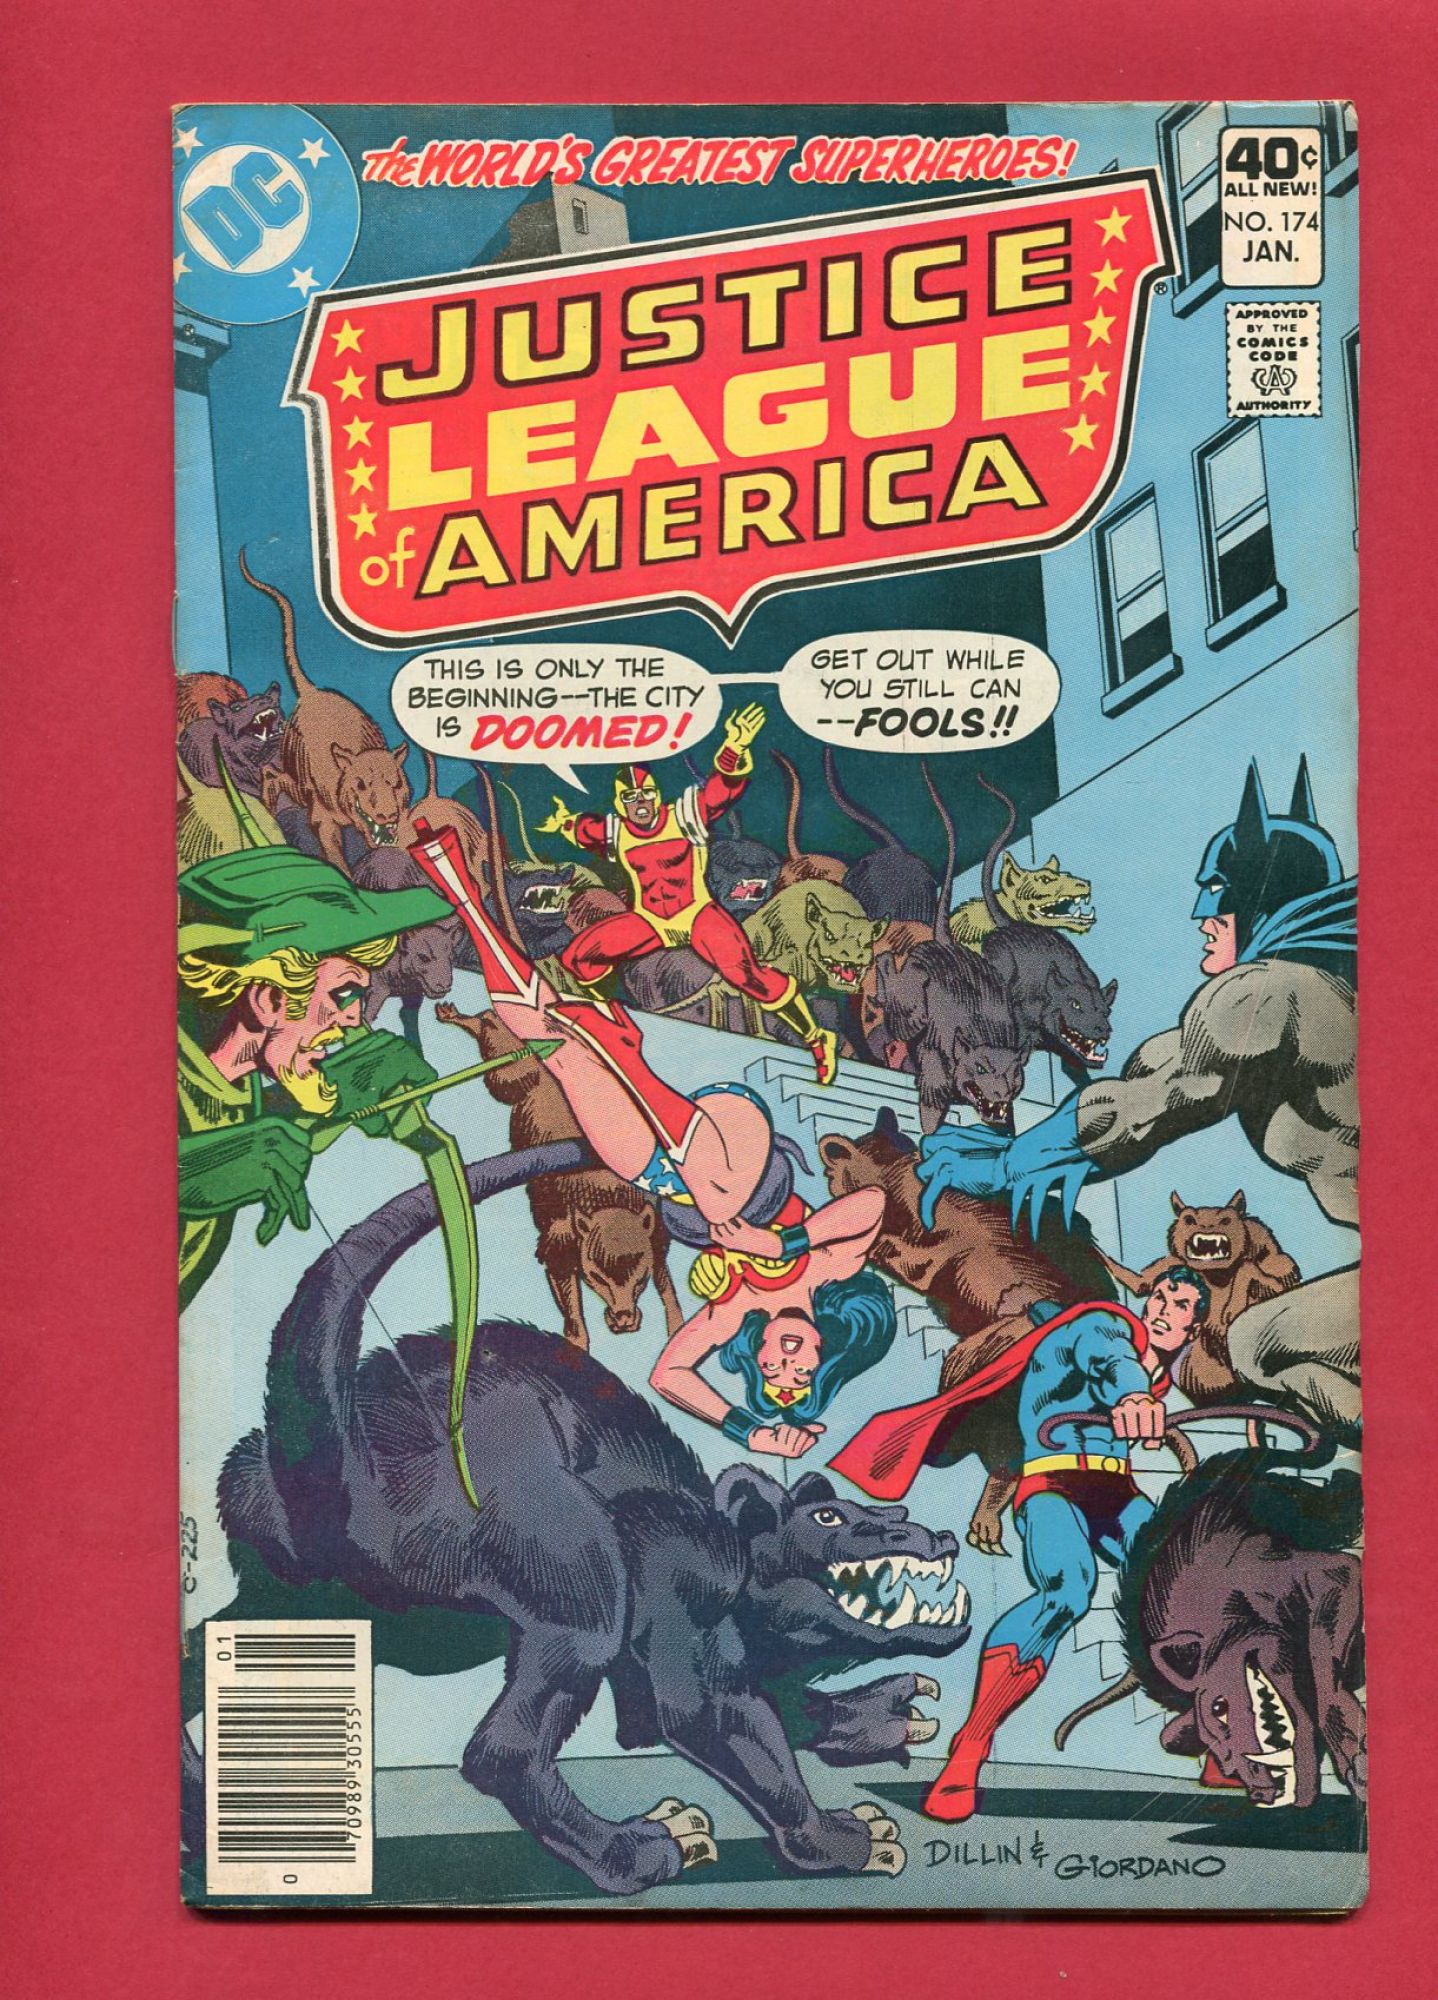 Justice League of America #174, Jan 1980, 7.5 VF-